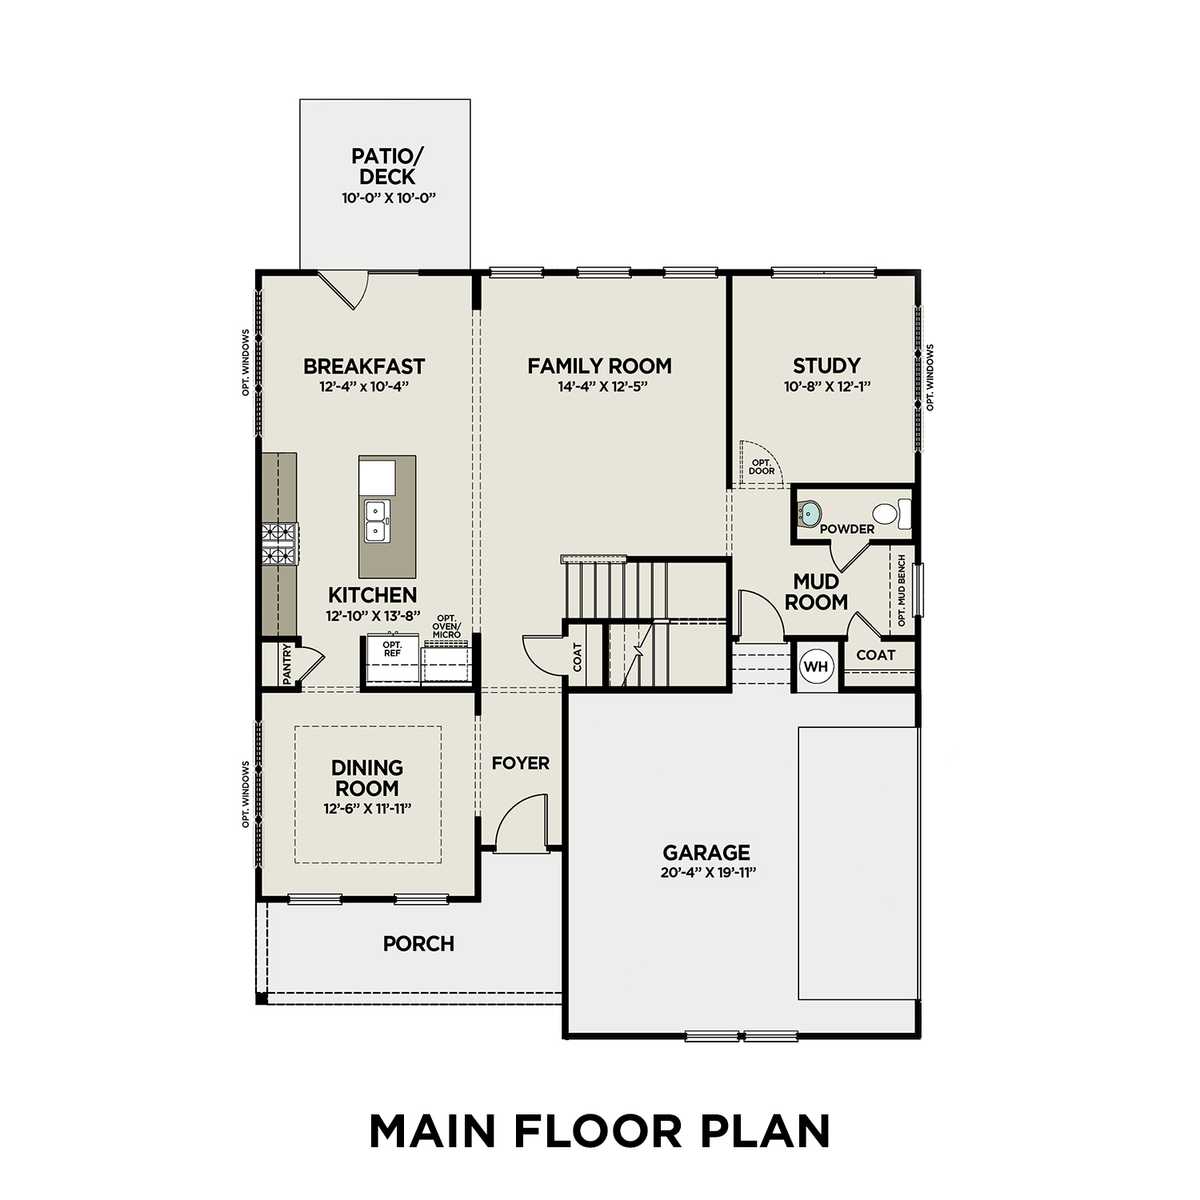 1 - The Willow B – Side Entry floor plan layout for 38 Brookside Way in Davidson Homes' Mountainbrook community.